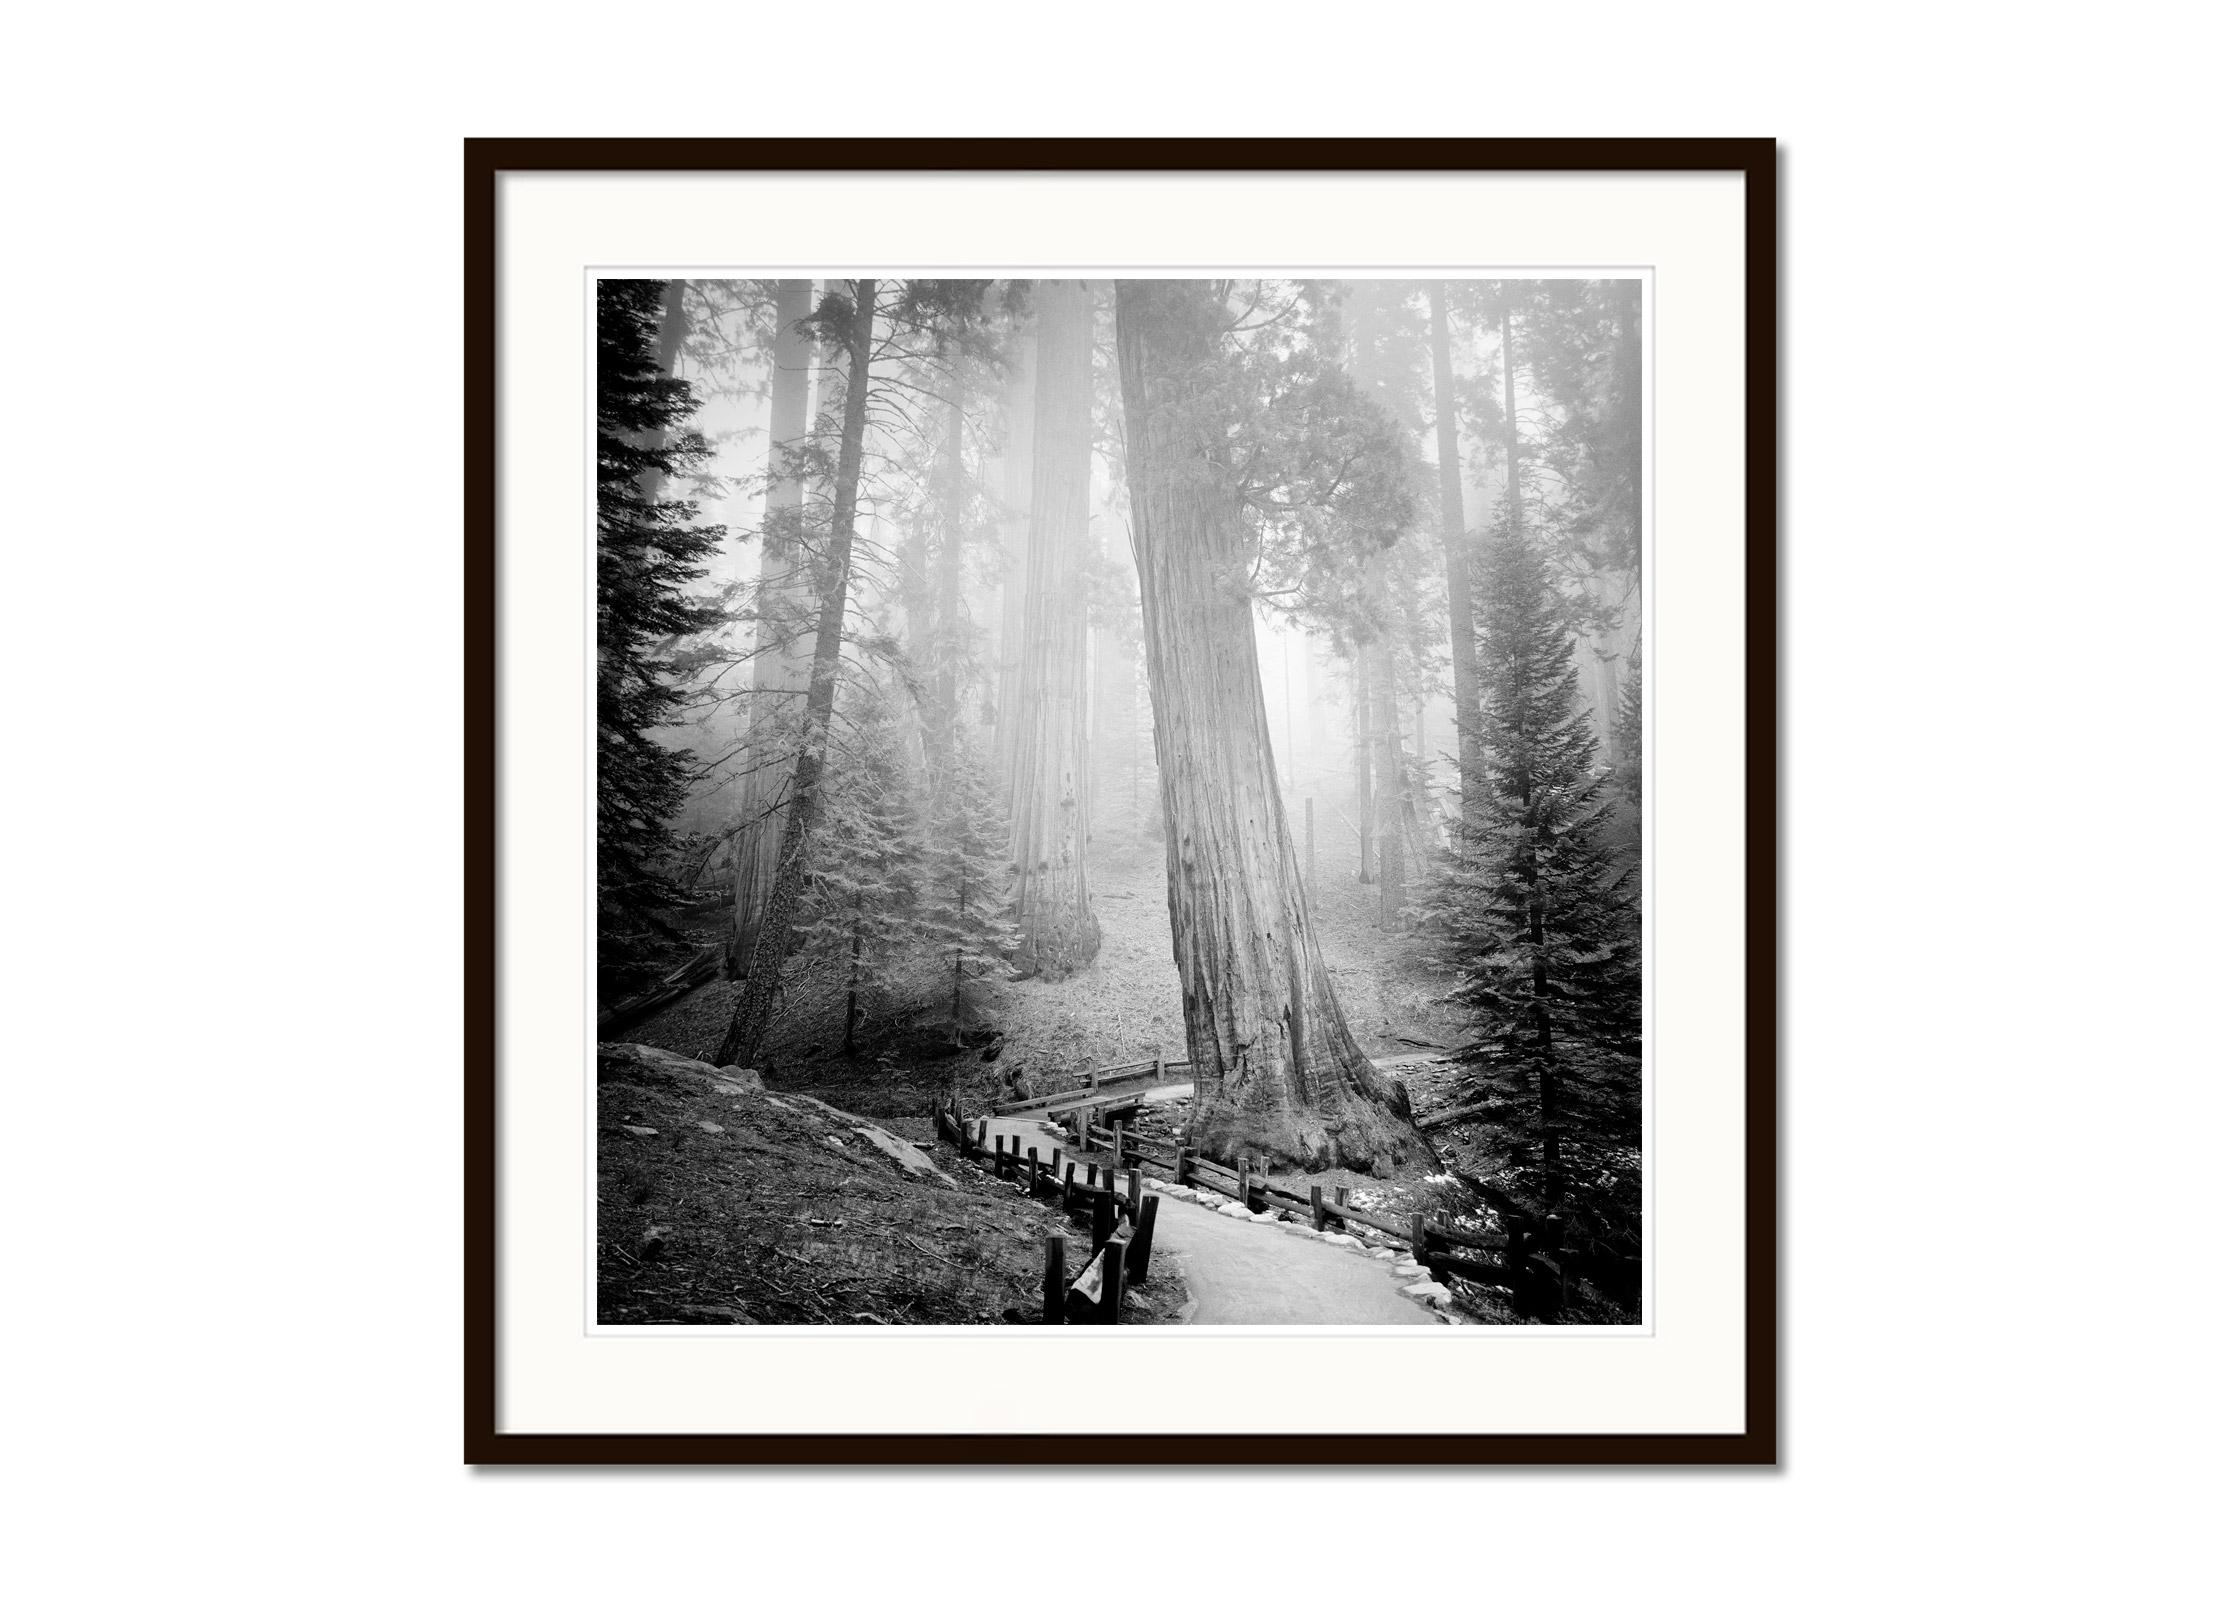 Redwood, Sequoia Nationalpark, USA, black and white photography, art, landscape - Contemporary Photograph by Gerald Berghammer